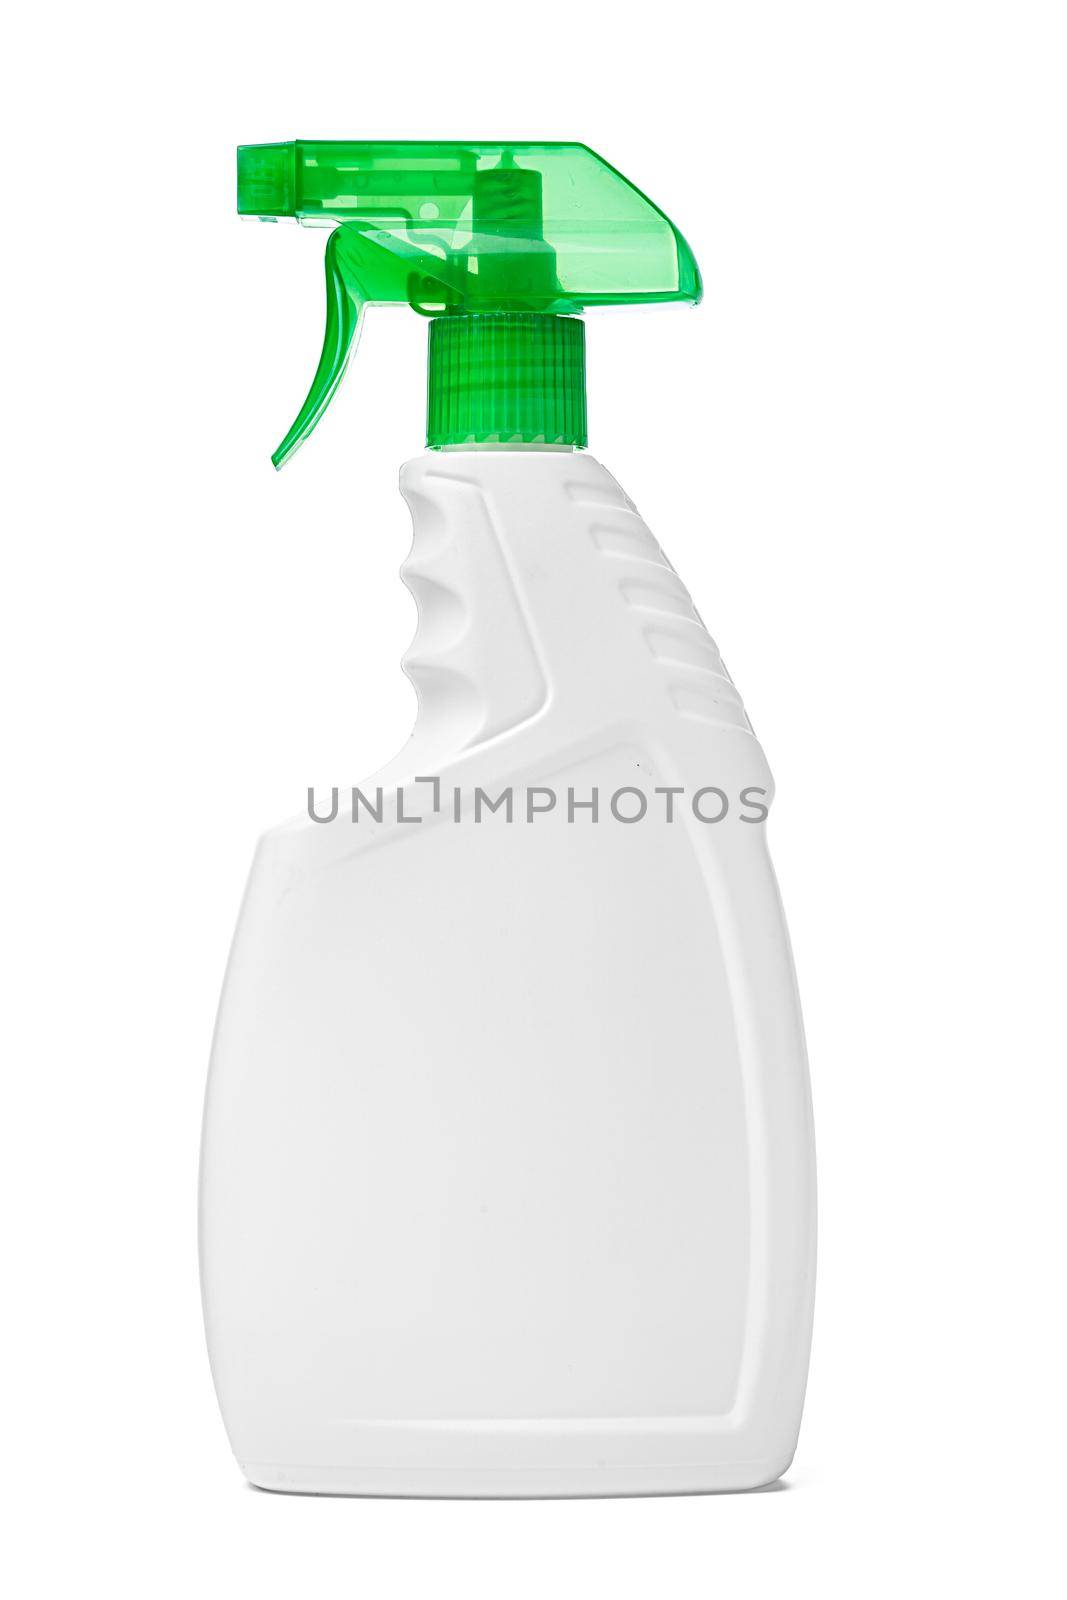 Cleaning spray bottle isolated on white background by Fabrikasimf